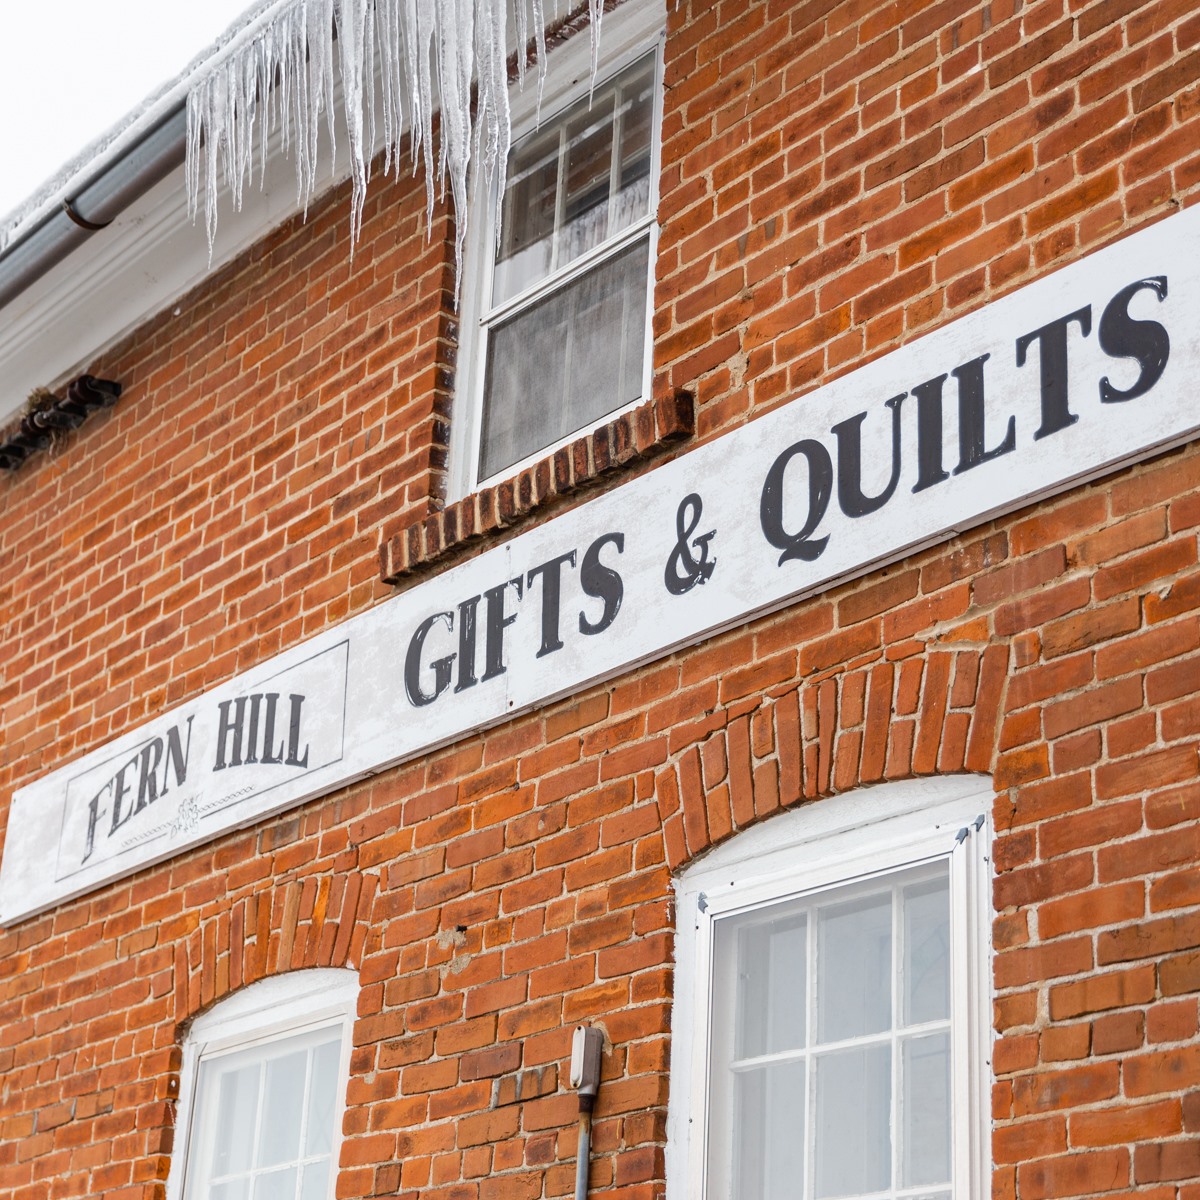 Fern Hill, Gifts Quilts & Antiques